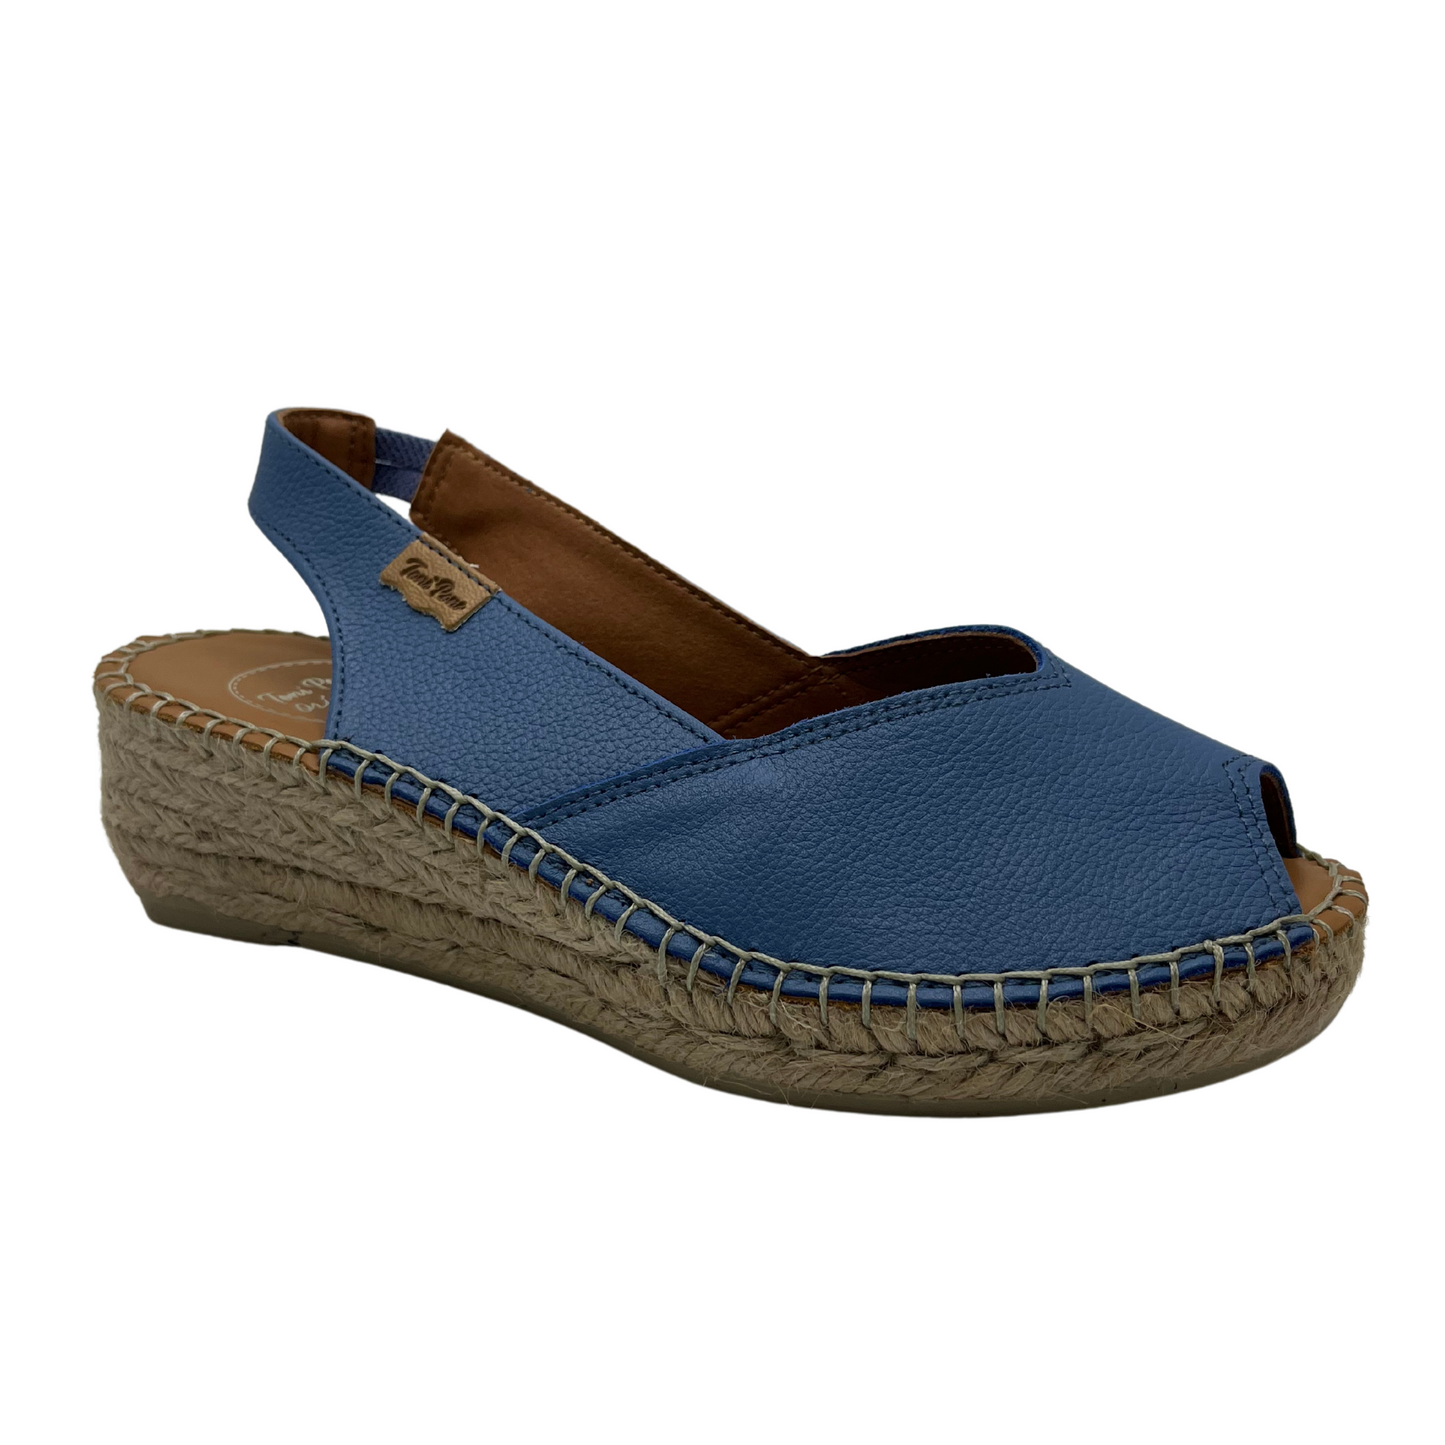 Angled front view of a whte espadrille sandal with a peep toe opening and heel strap. Shown in denim